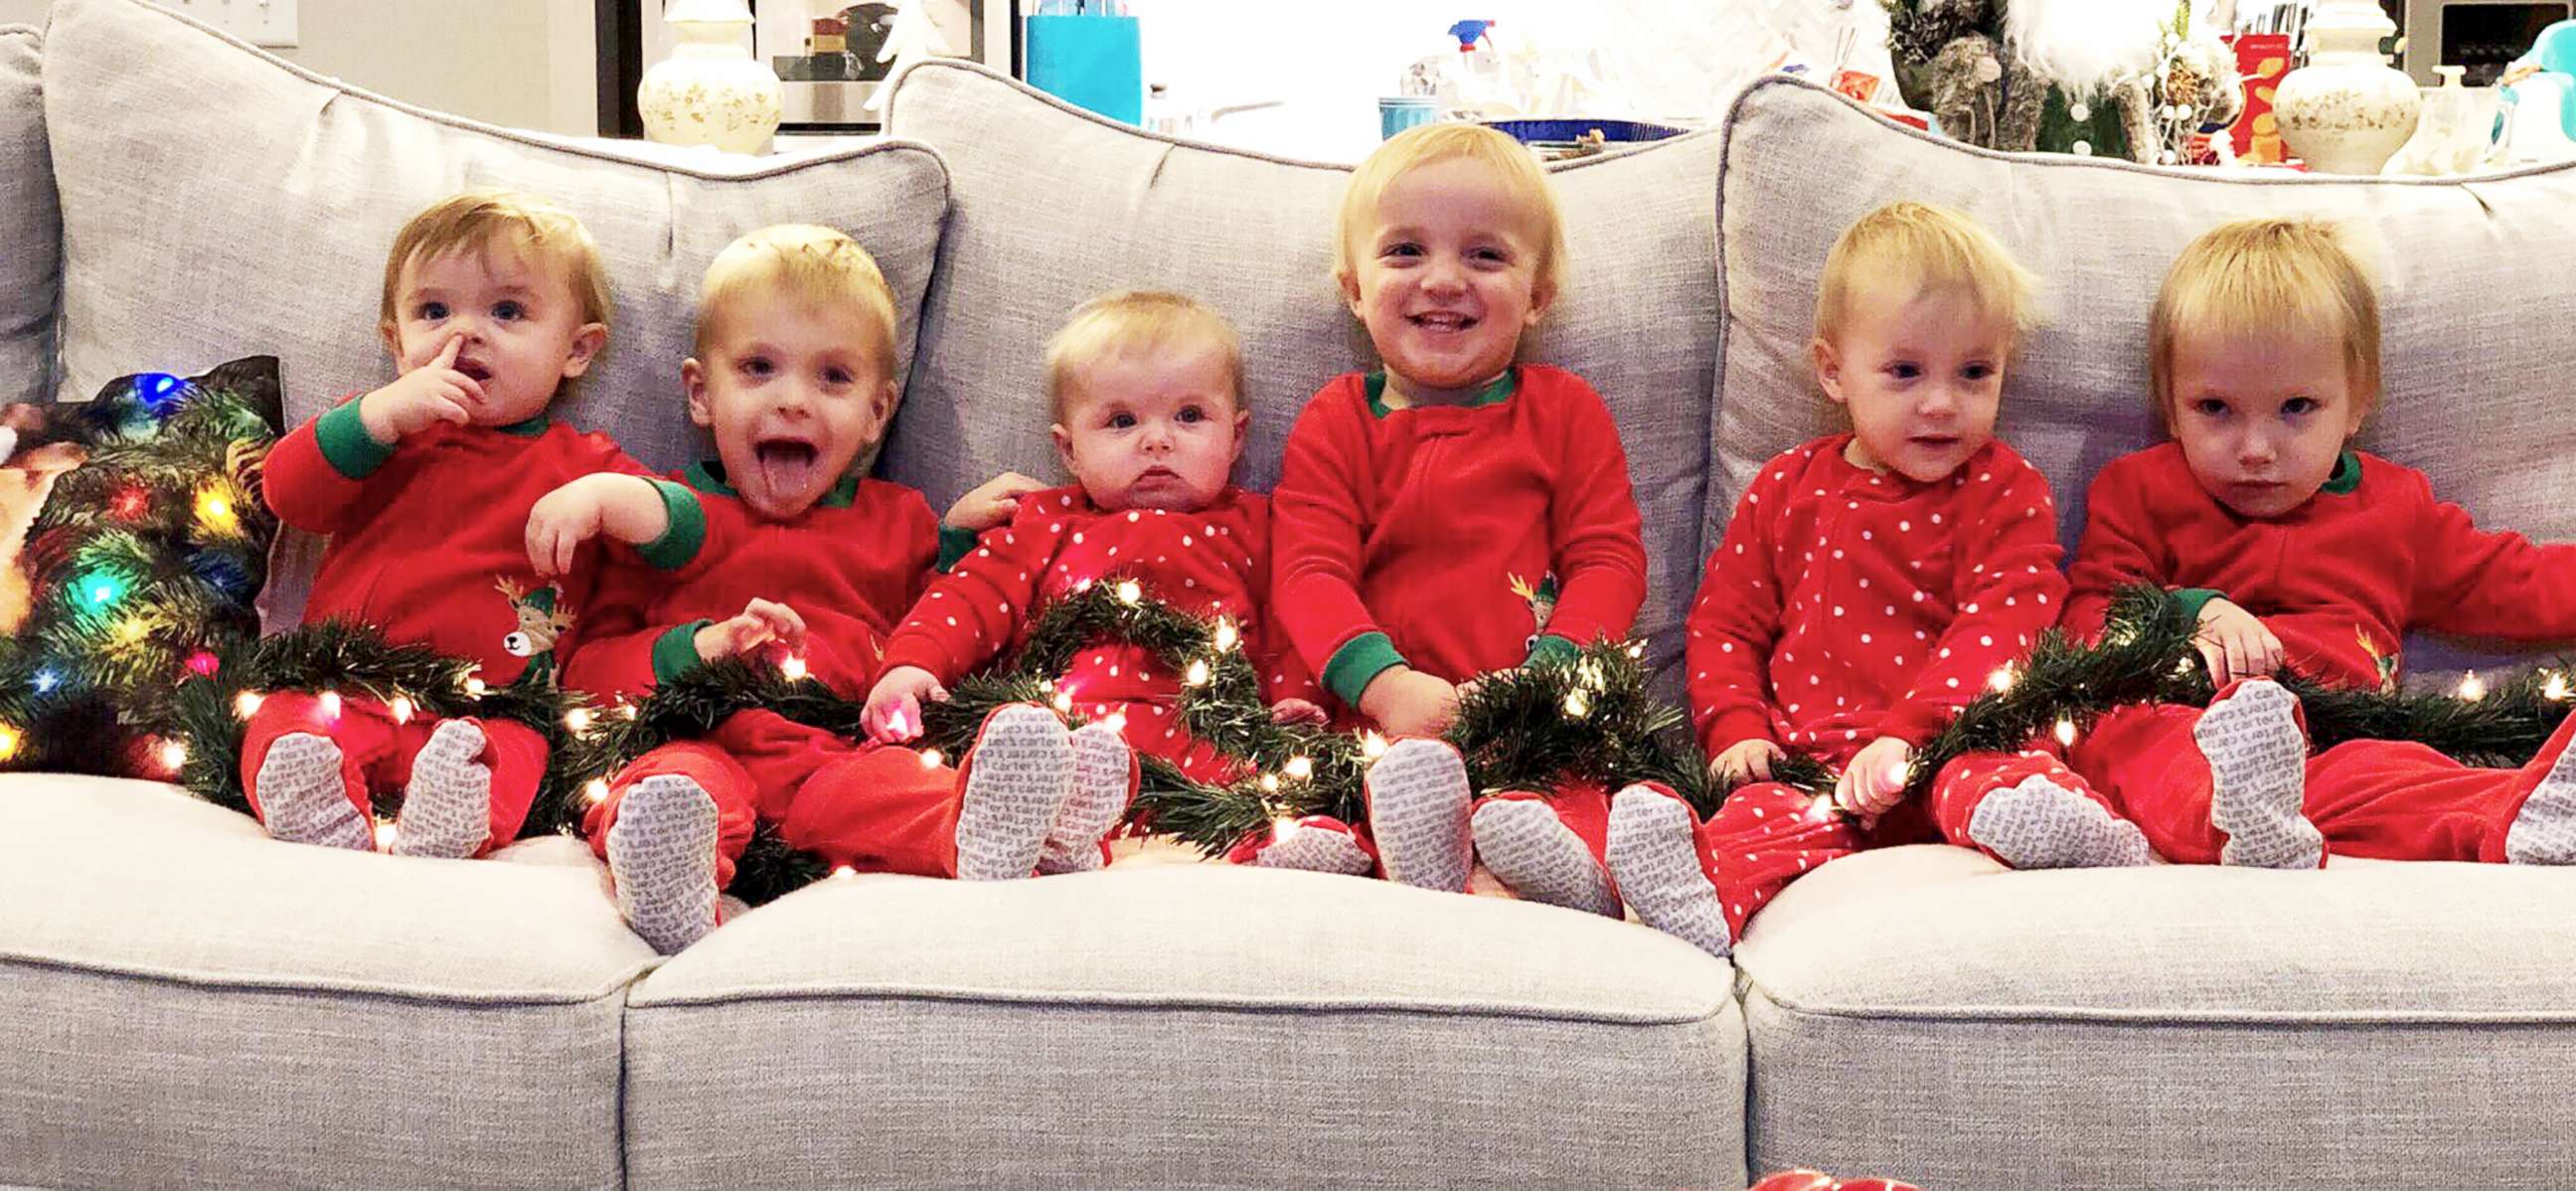 PHOTO: Kids pose for a Christmas photo. From left Hudson Daum (age 1), Carter Daum (3), Abby Eichner (7 months), twins Ben & Sophie Stockburger (2), and Luke Eichner (2). 